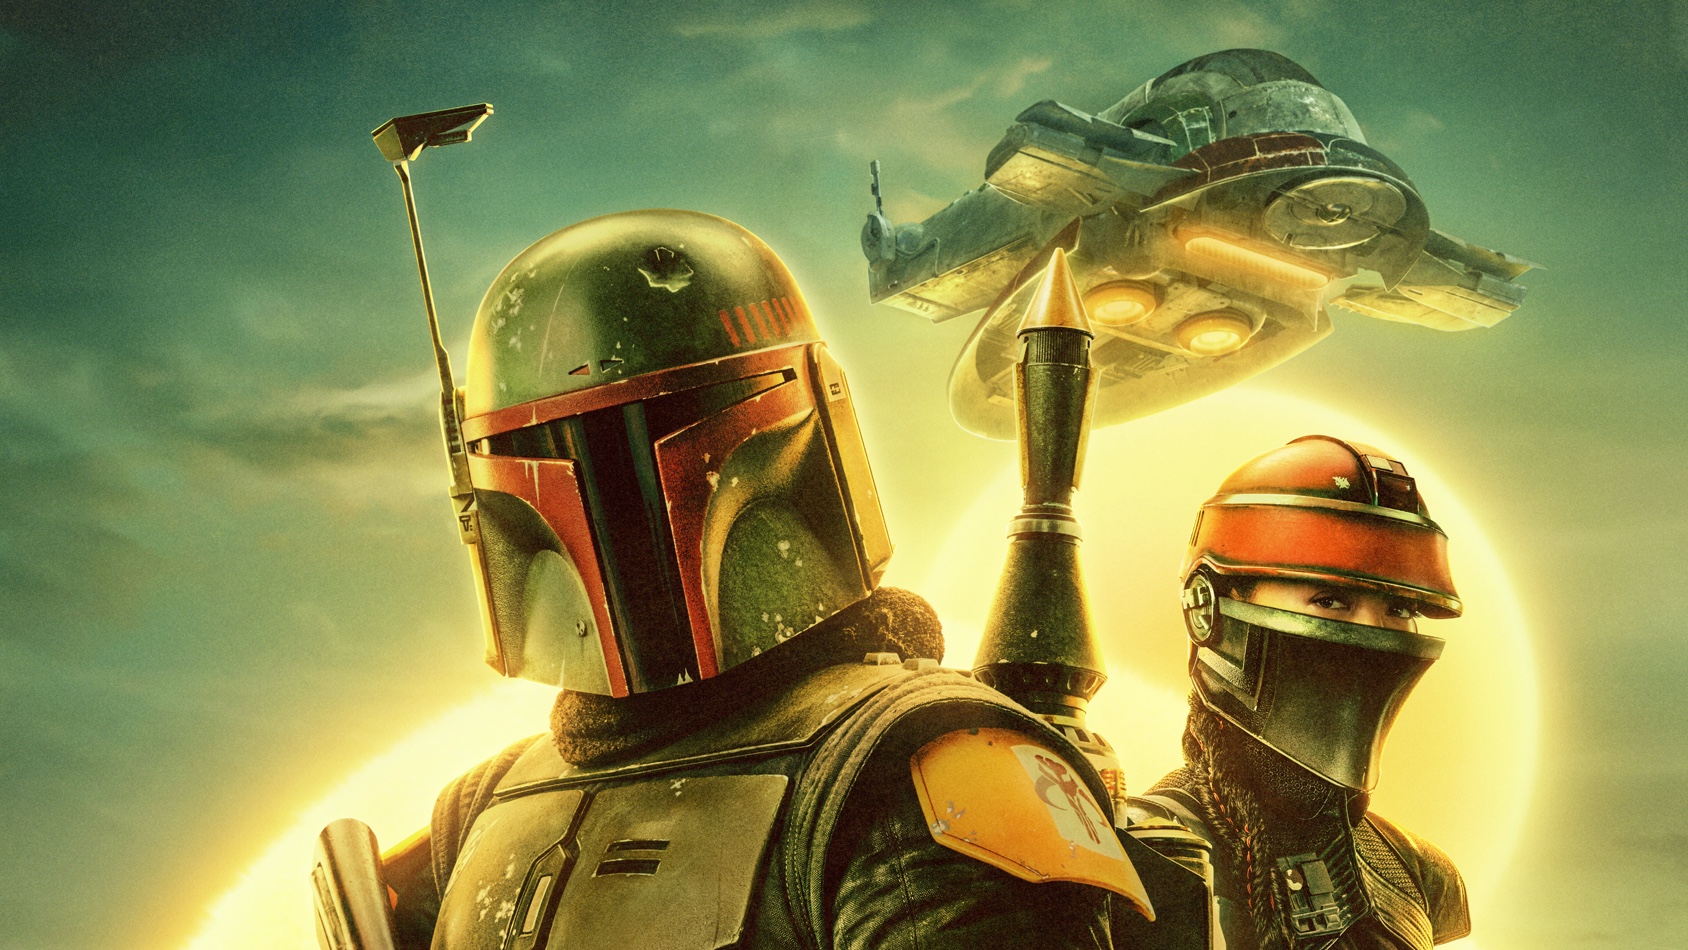 The Book of Boba Fett: Release Date